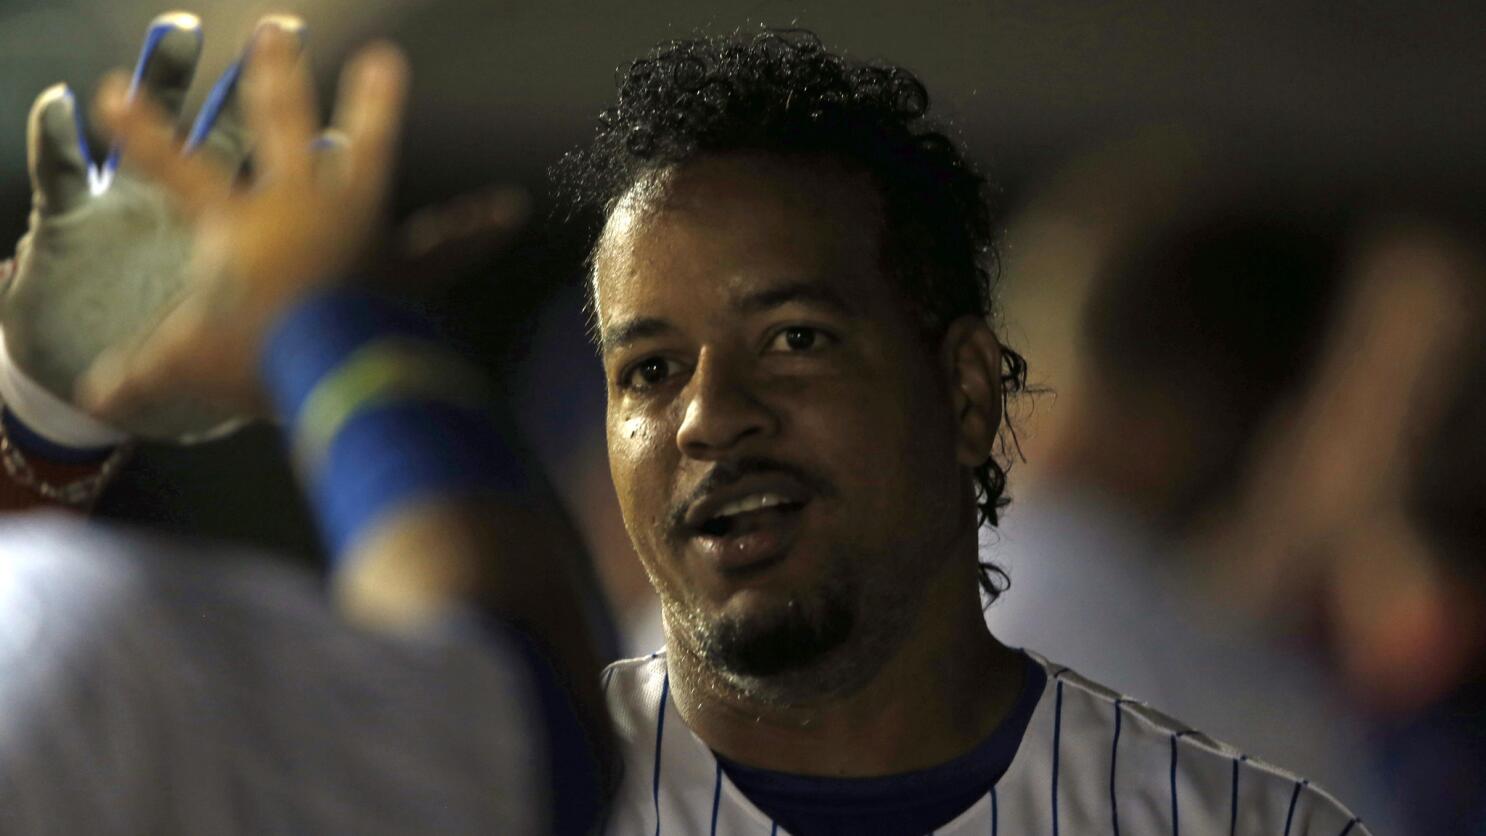 He played the game because he loved it' Manny Ramirez's career